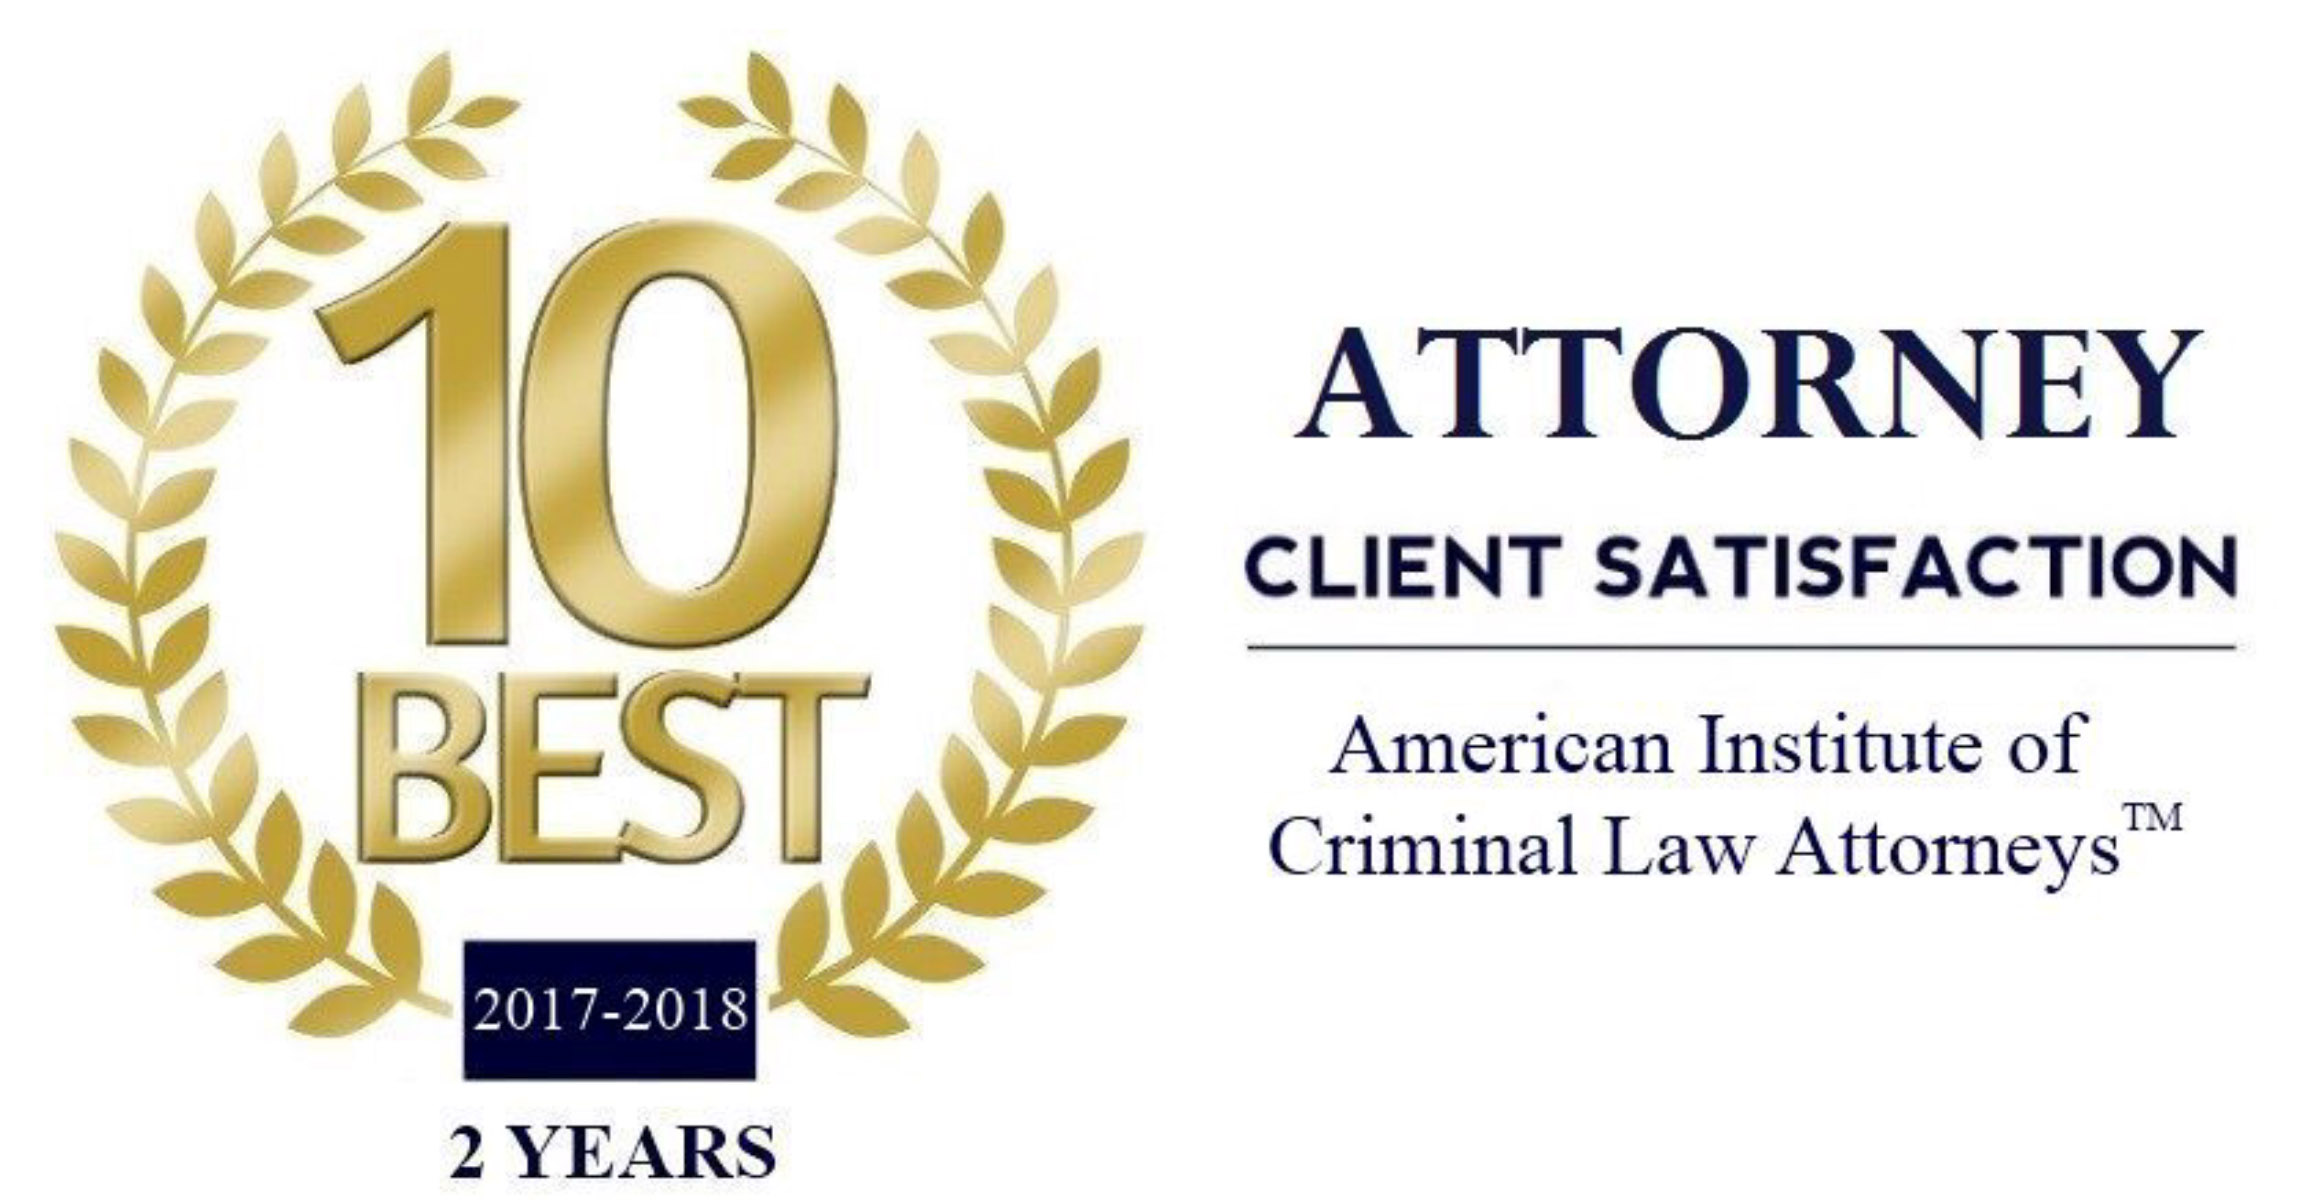 10 Best Award 2017-2018 - 2 Years Attorney Satisfaction by the American Institute of Criminal Law Attorneys™